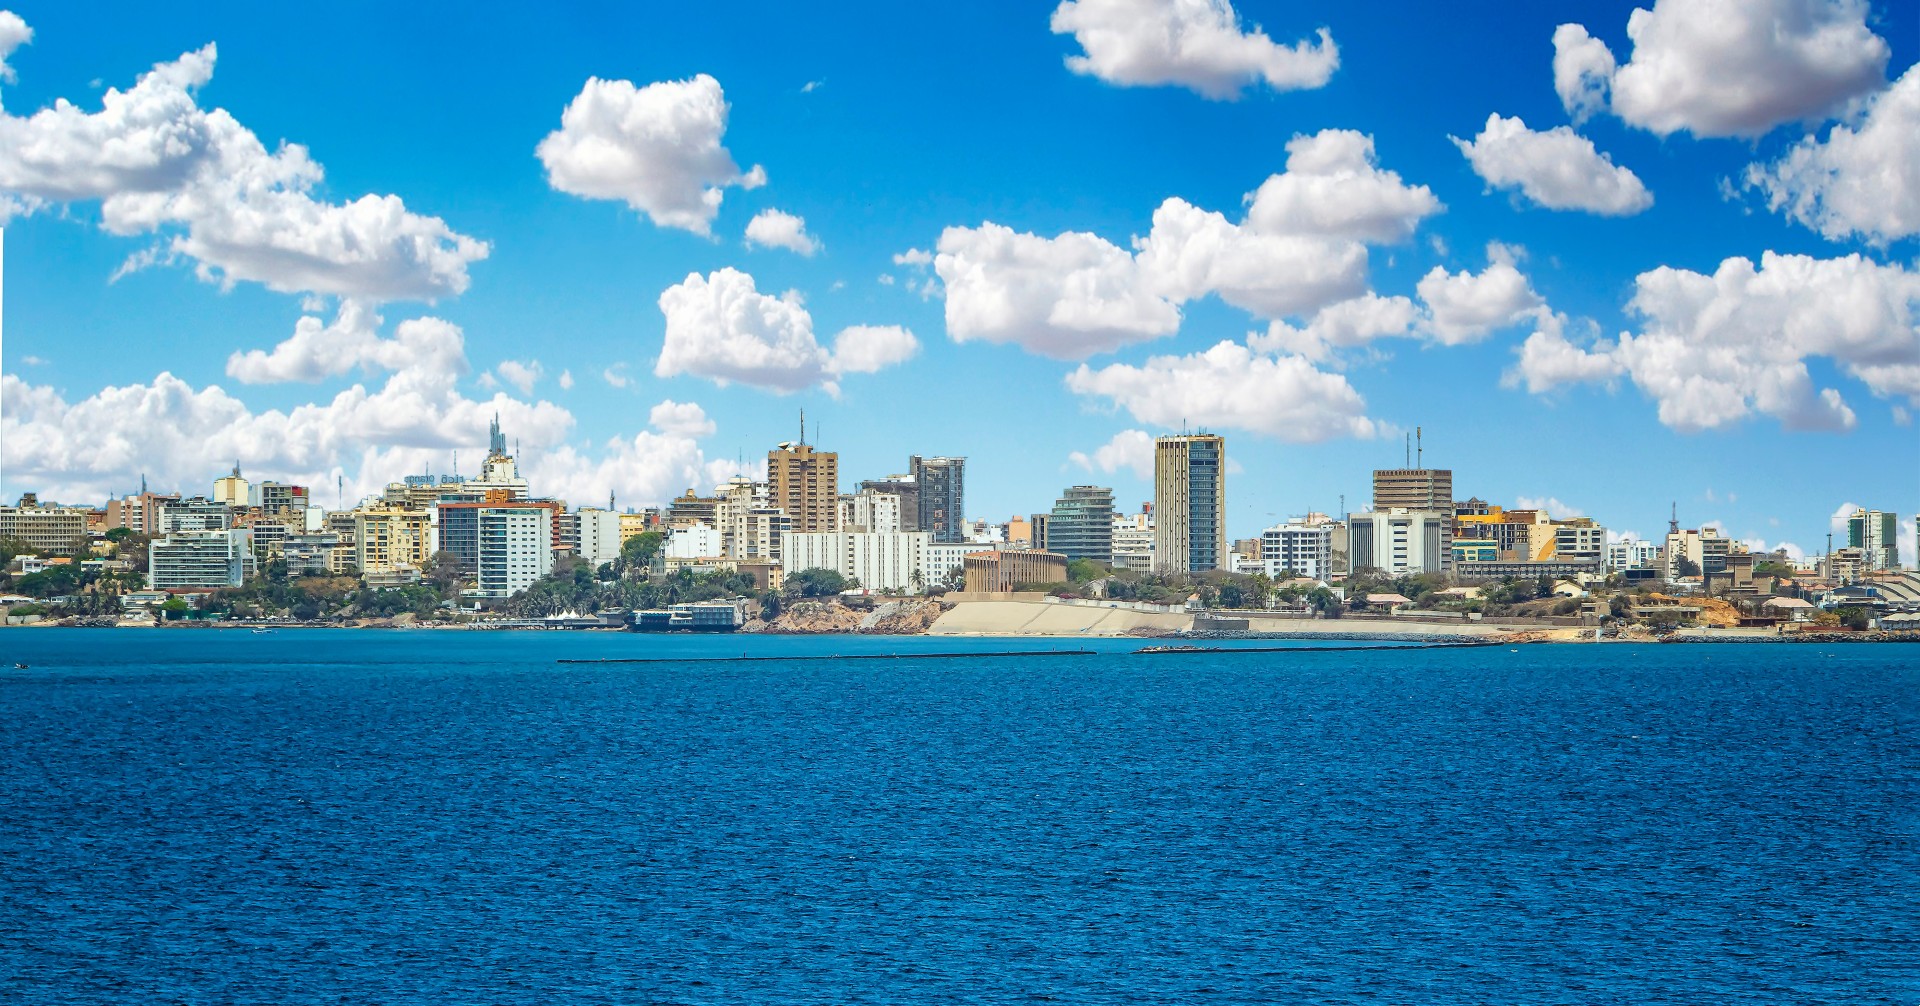 View of the Senegal capital of Dakar, Africa. It is a city panorama taken from a boat. There are large modern buildings and a blue sky with clouds.